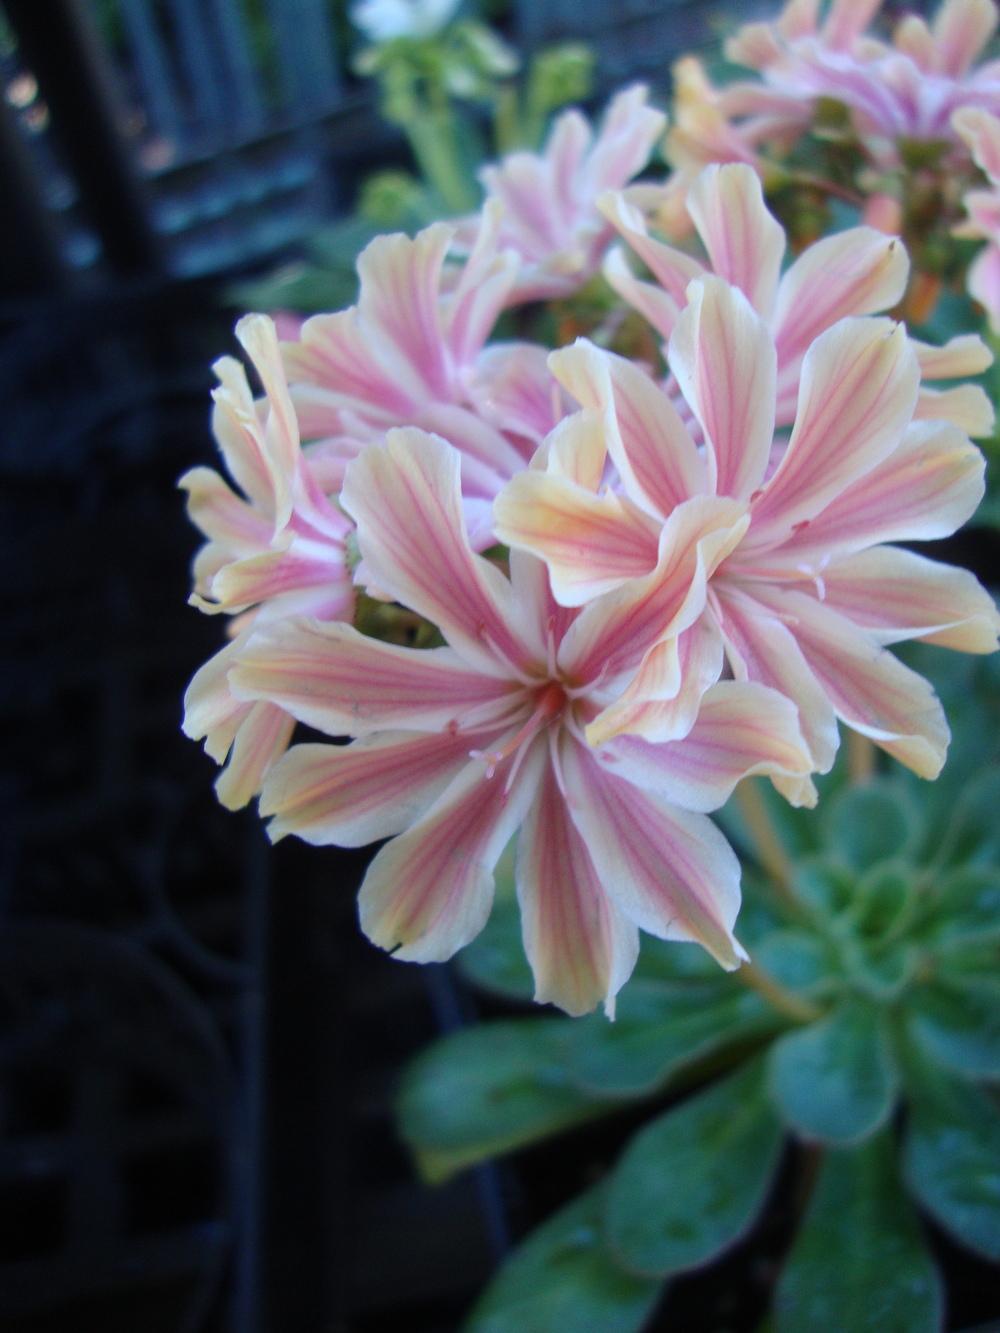 Photo of Bitterroot (Lewisia) uploaded by Paul2032